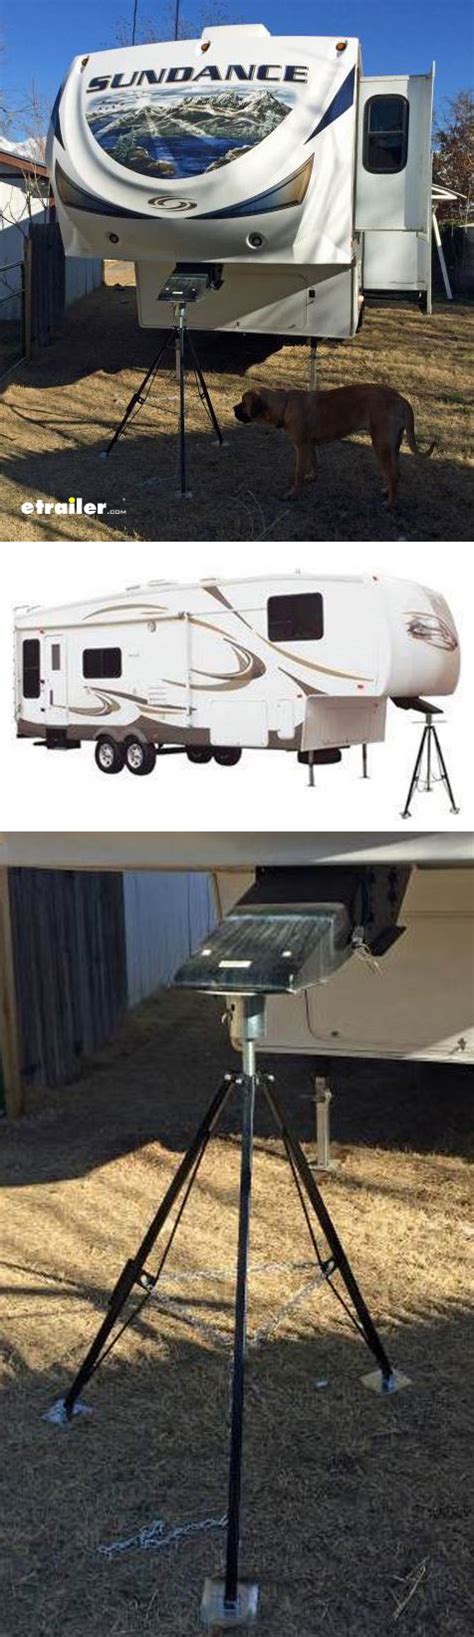 The best 5th wheel hitch is the curt 16245 q24 hitch, which can be used for towing up to 24,000 lbs and features a dual jaw system for 360 degree kingpin contact. Ultra-Fab Economy 5th Wheel King Pin Tripod Stabilizer ...